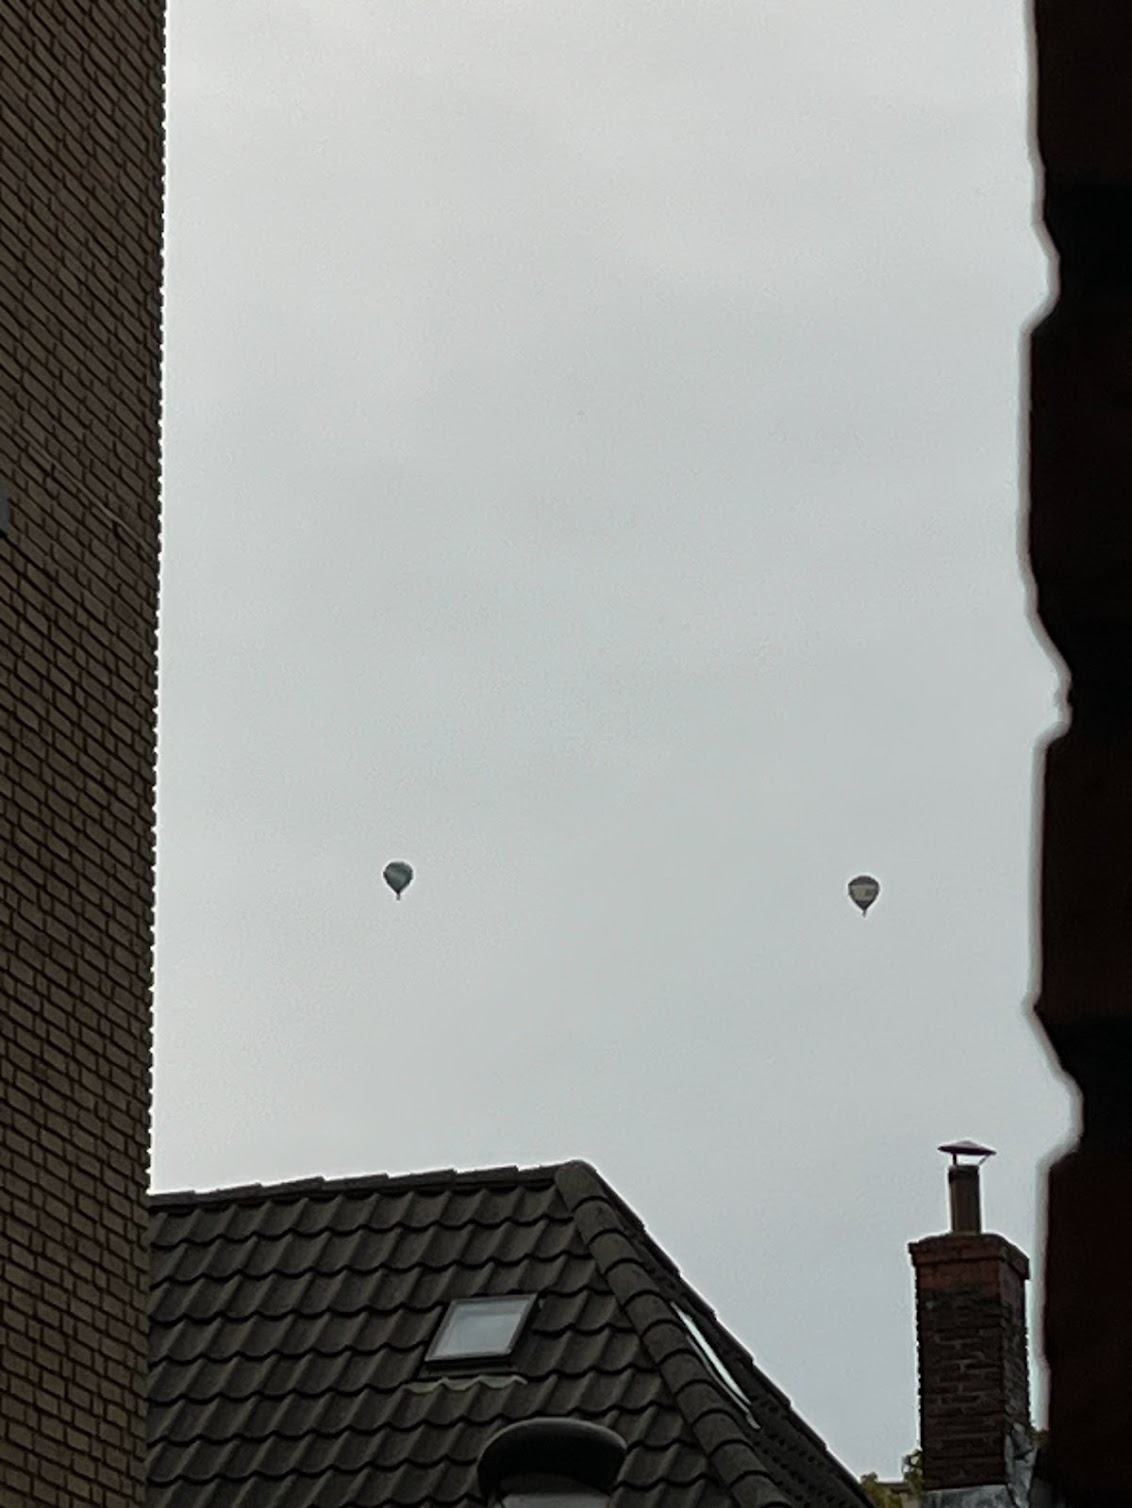 A photograph of two hot air balloons in the sky. They're framed by walls and a nearby roof.